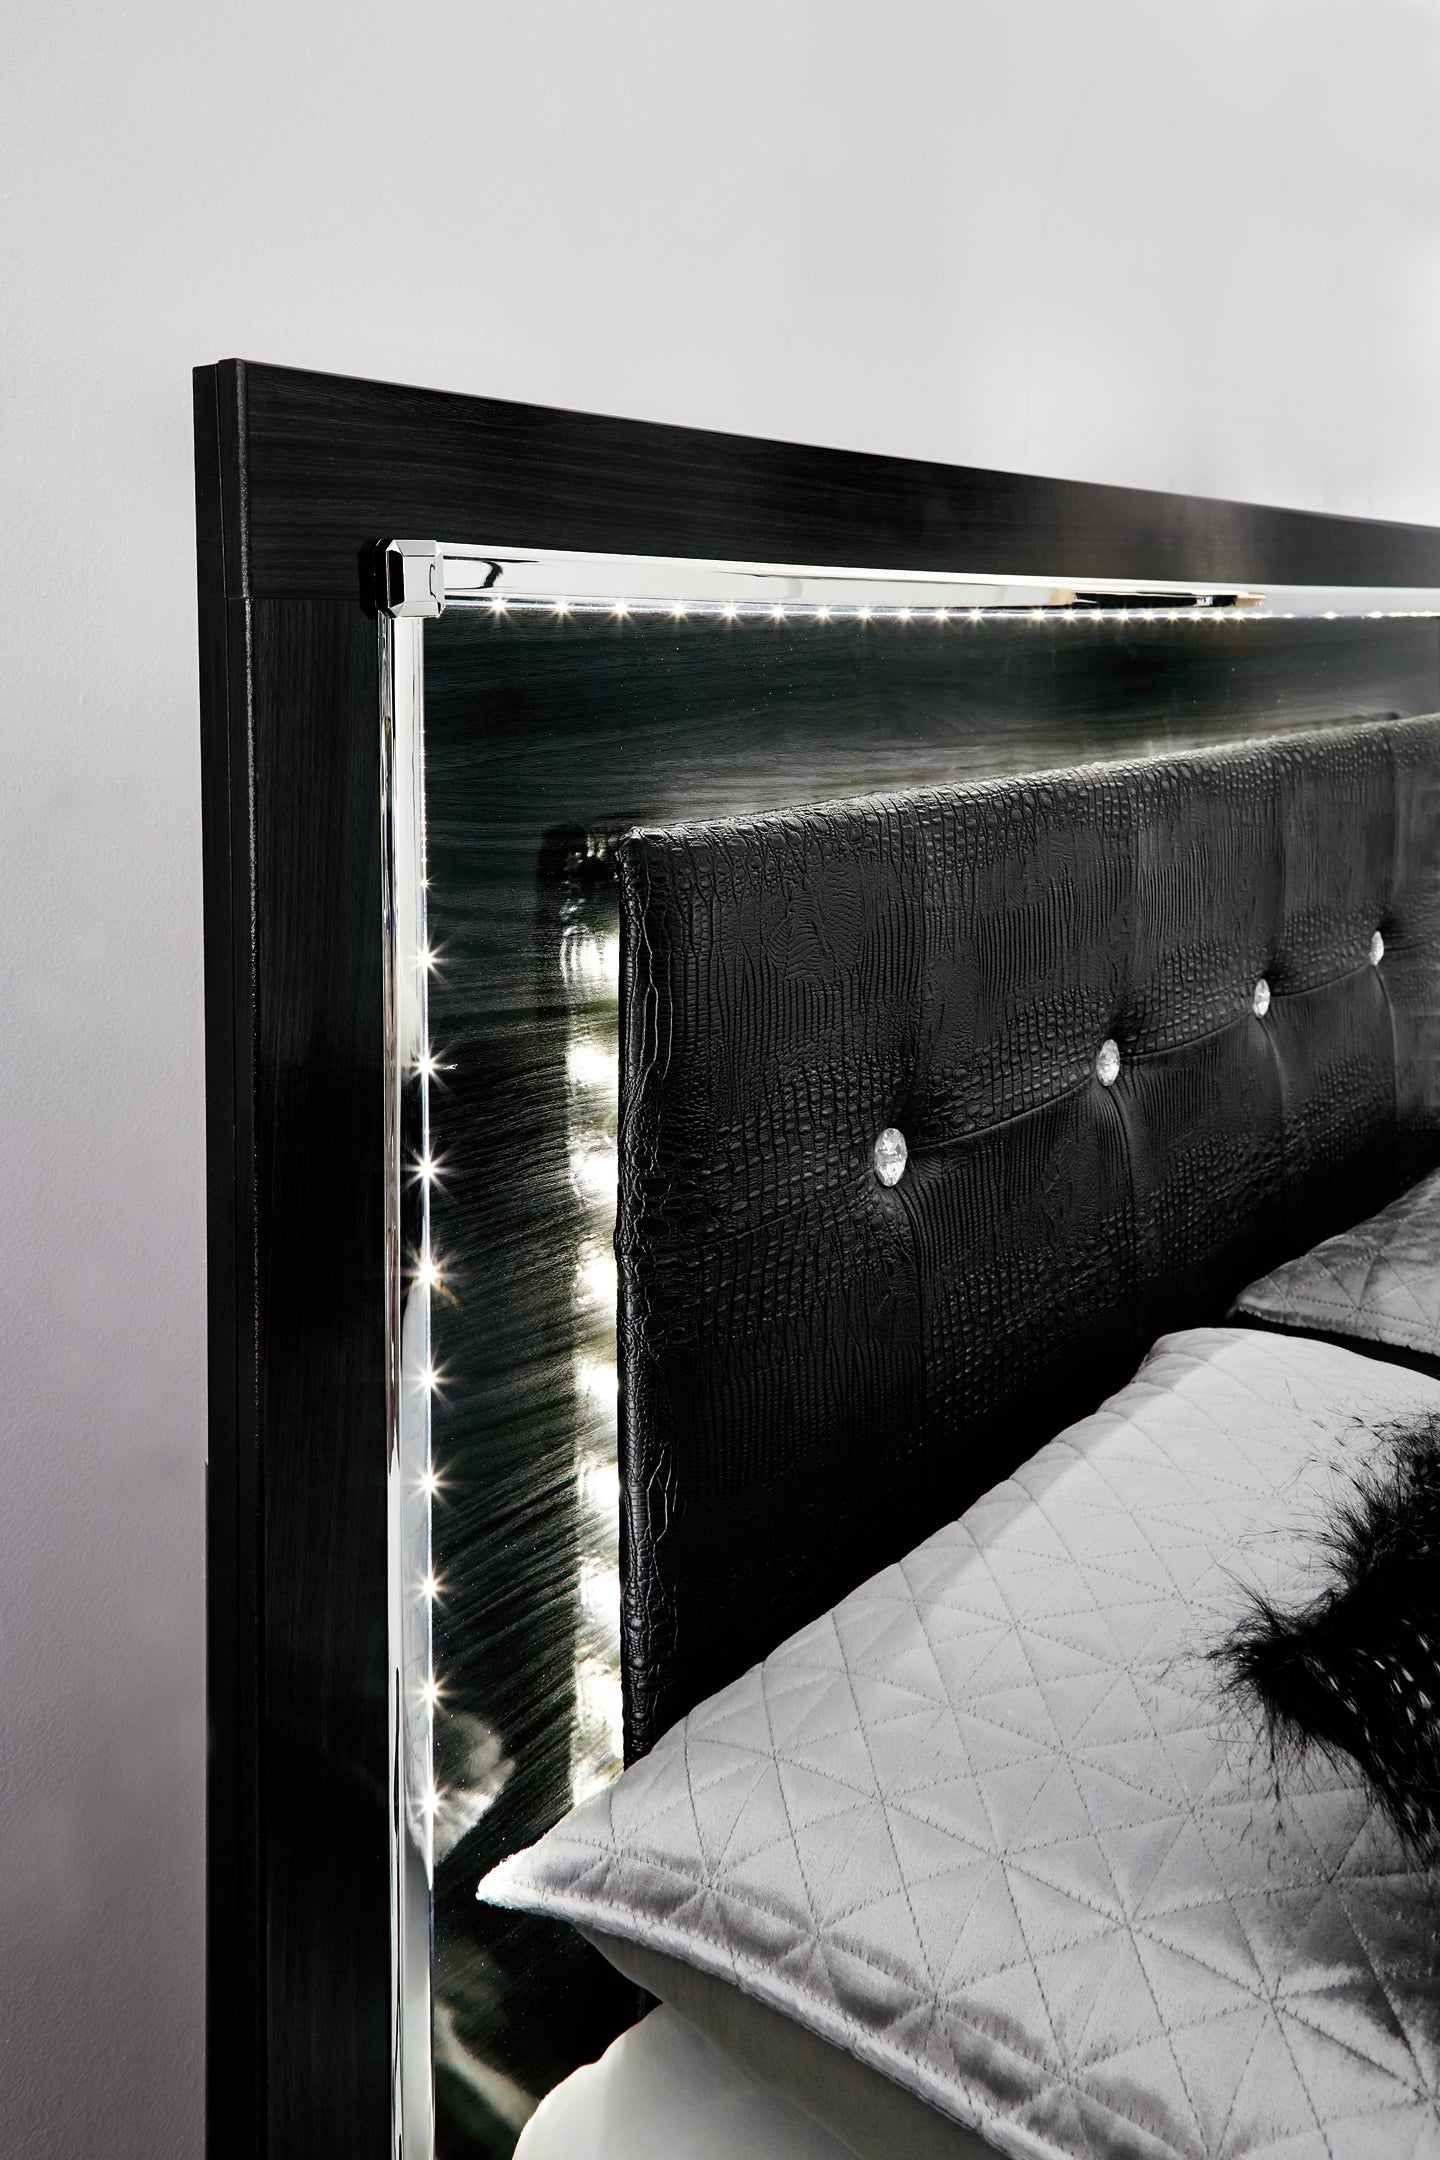 Kaydell Queen Panel Bed with Storage with Mirrored Dresser Signature Design by Ashley®